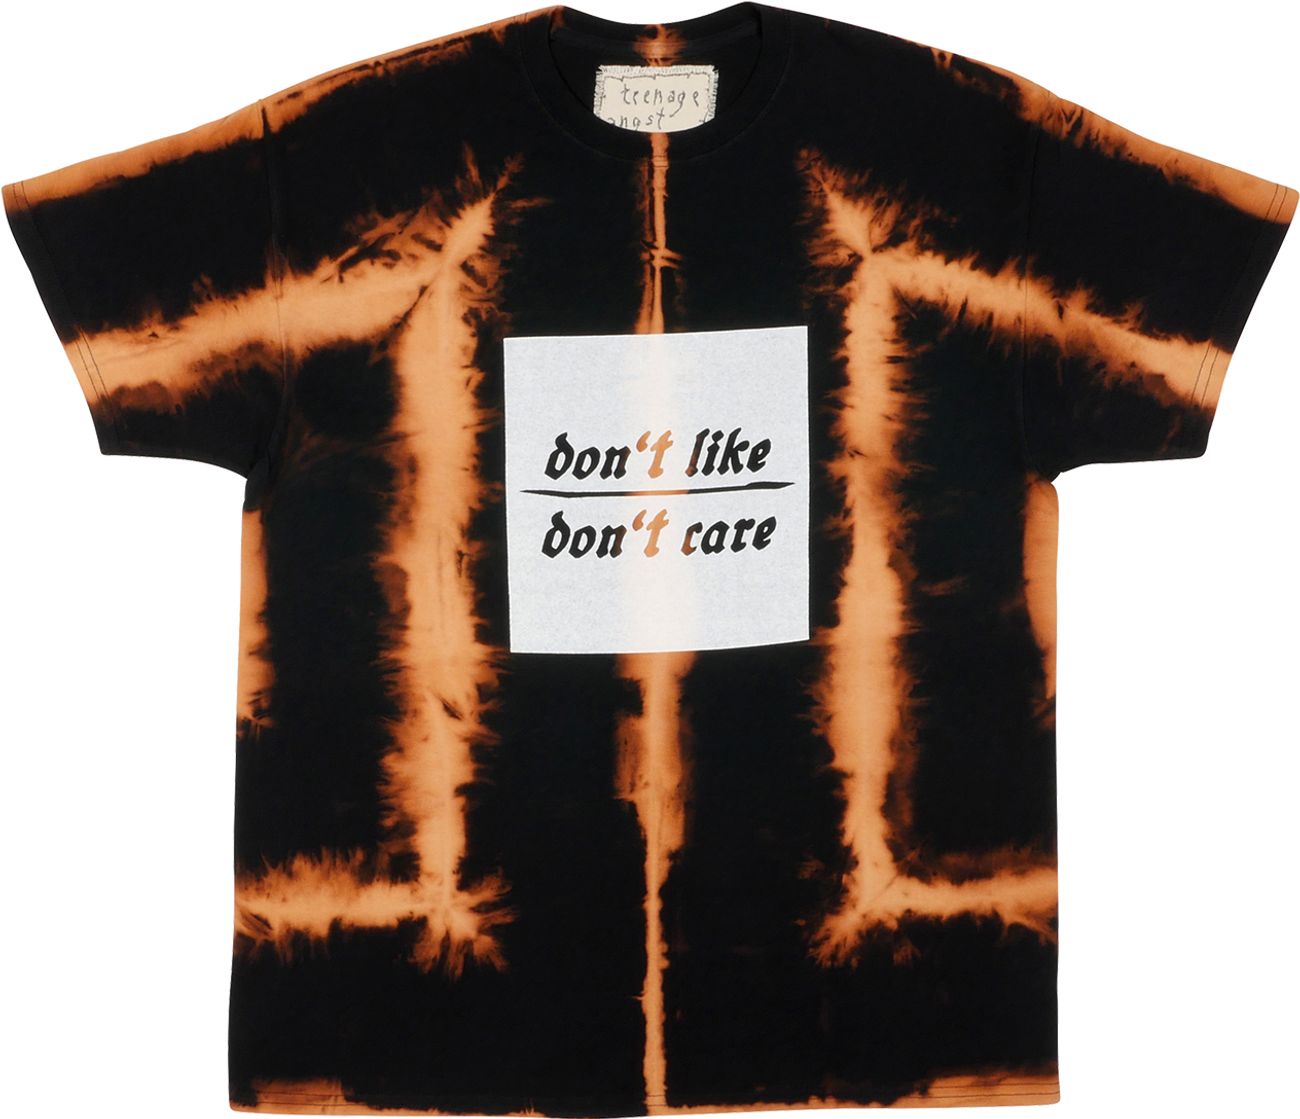 Teenage Angst "Don't like, don't care" T-Shirt - tie bleach square